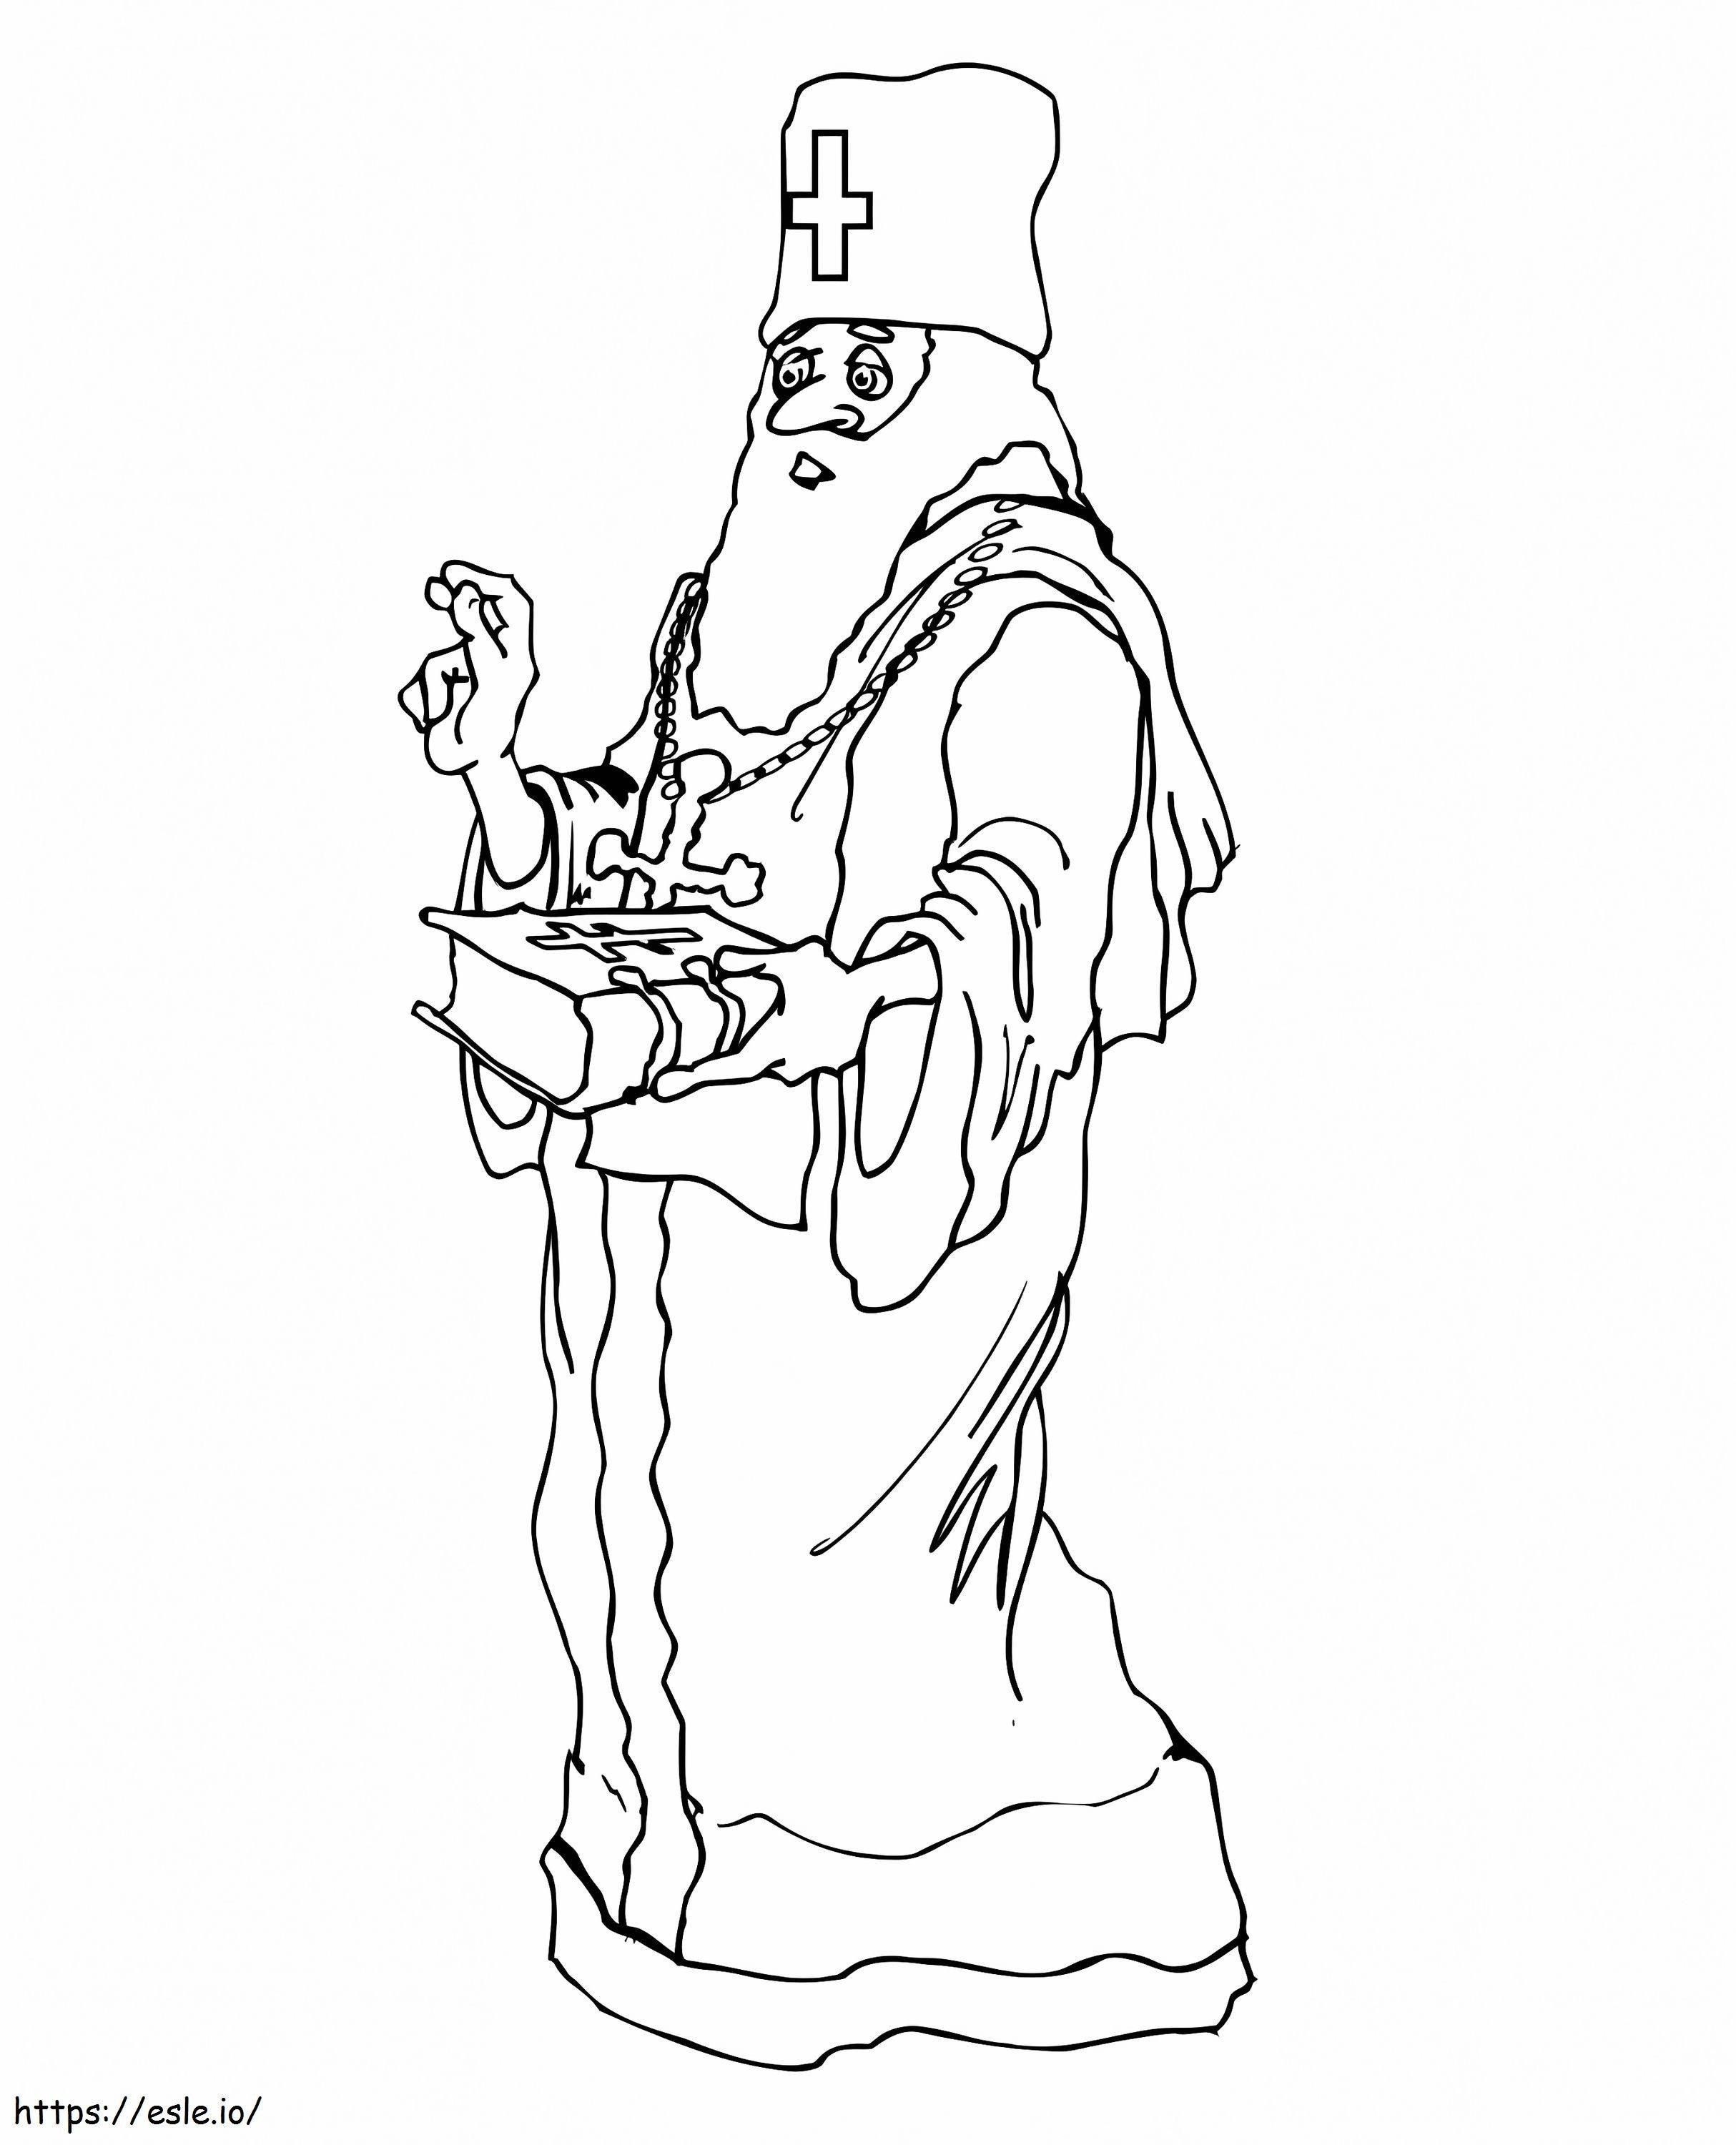 Old Priest coloring page